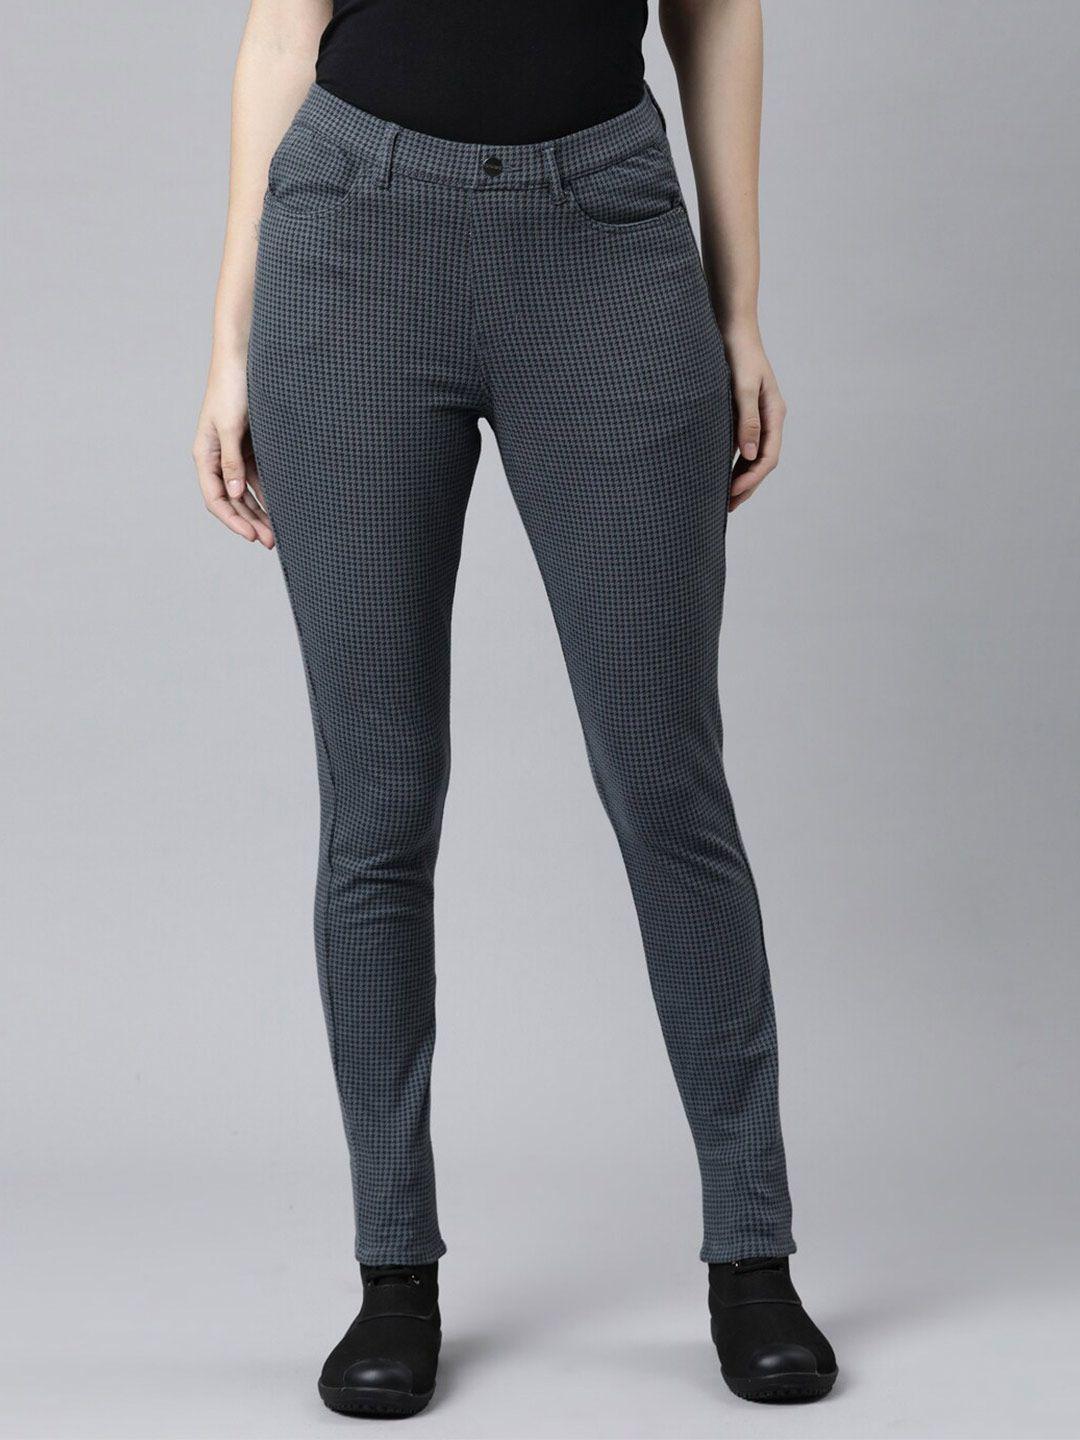 go-colors-women-slim-fit-checked-jeggings